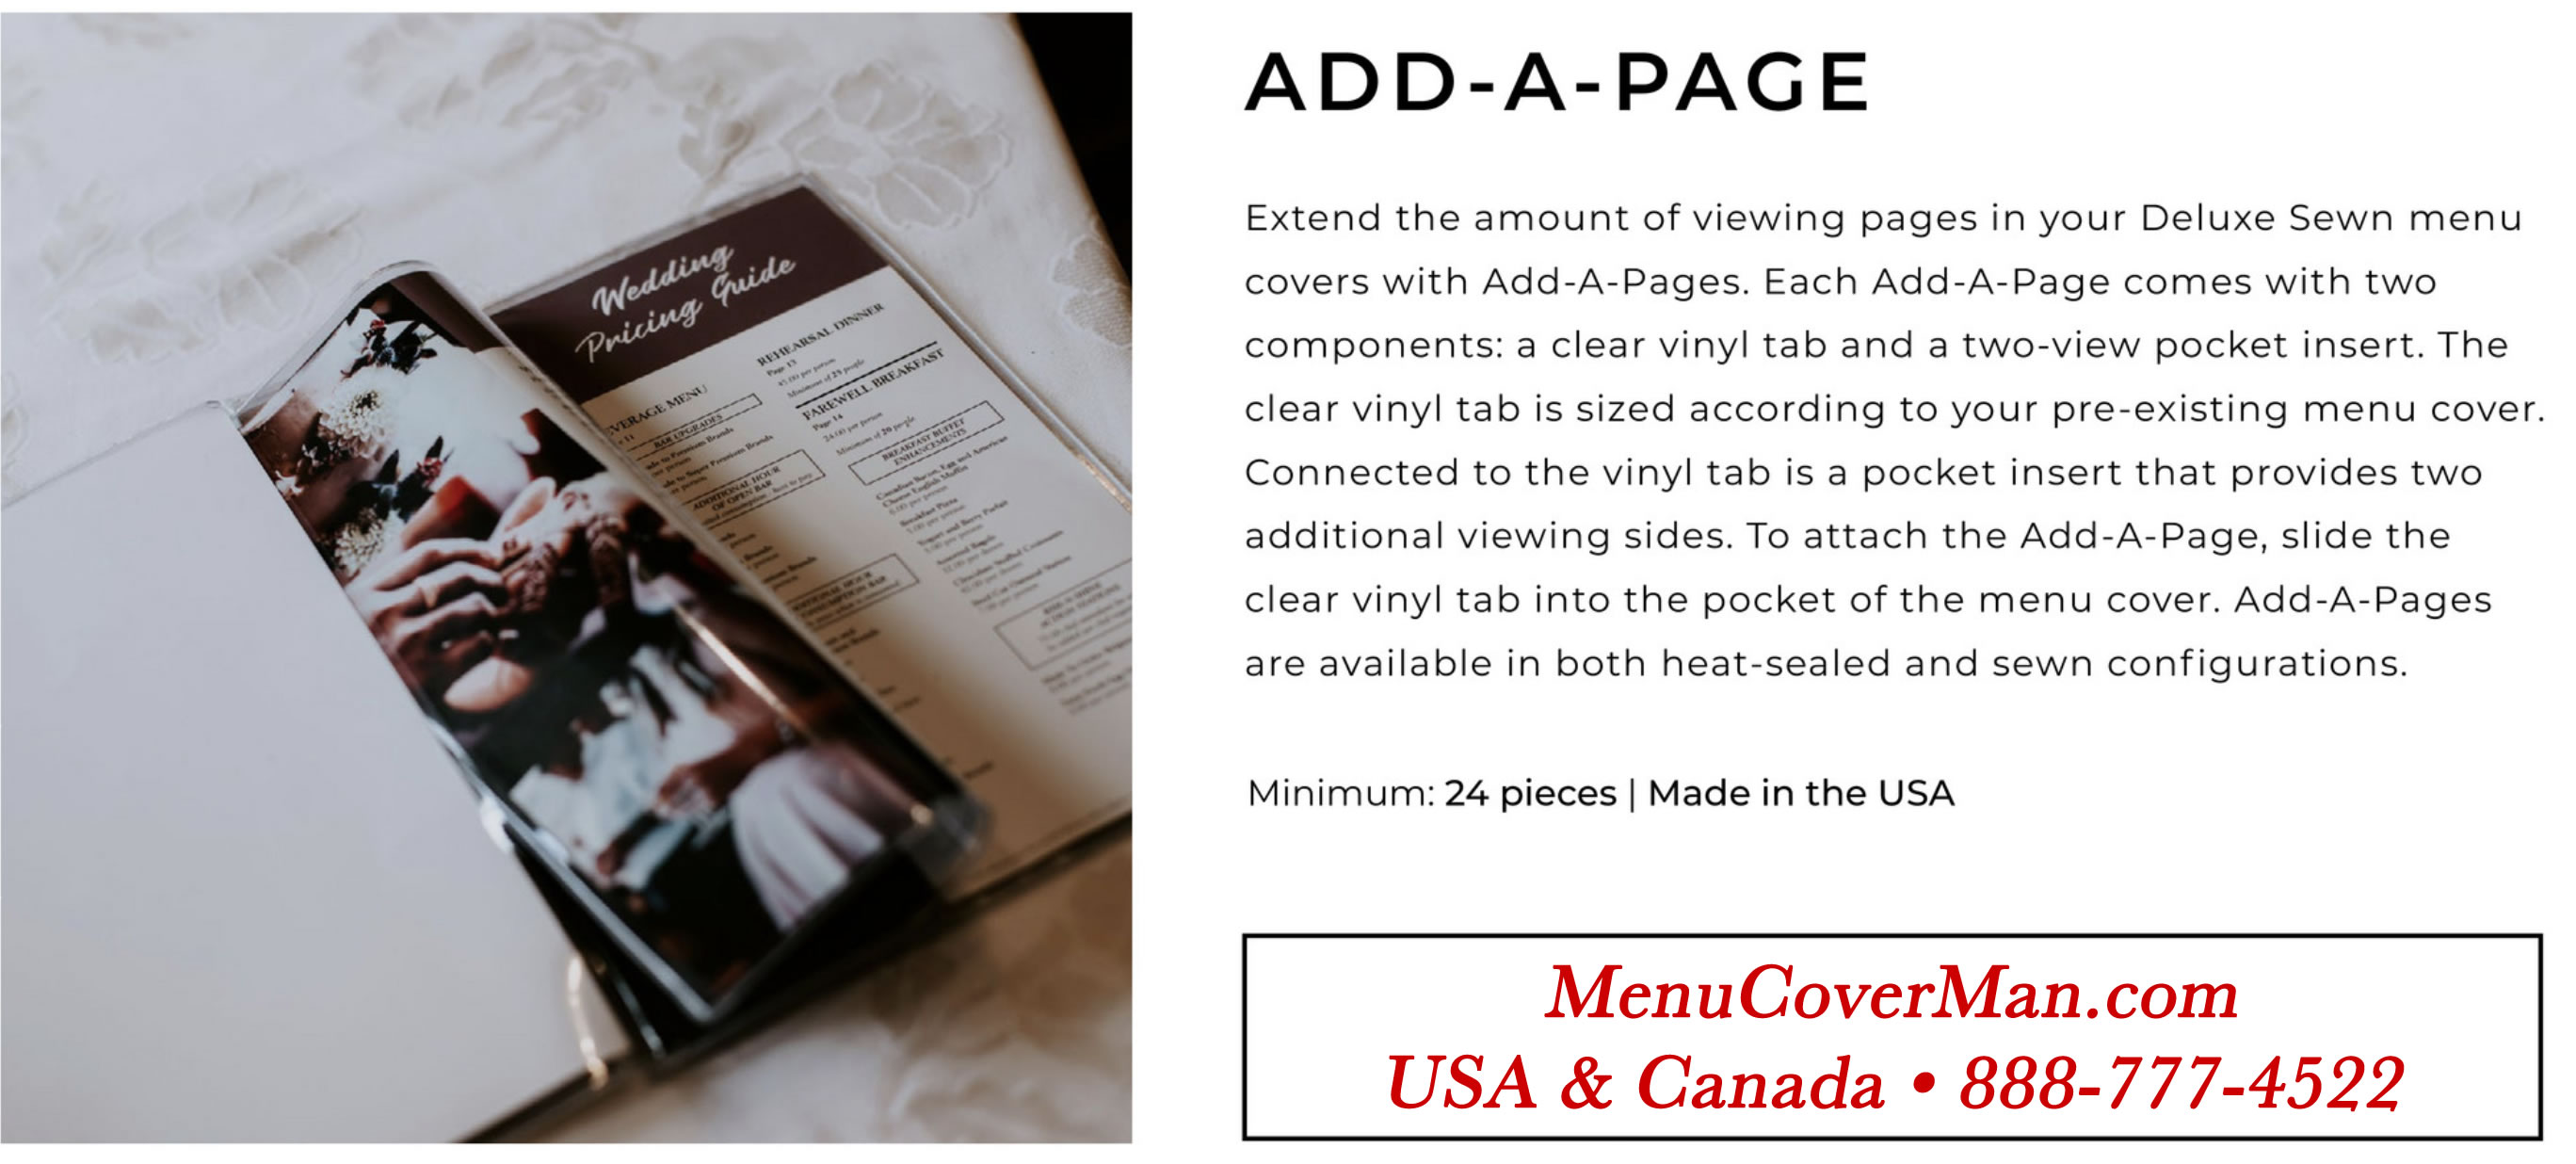 Add A Page is the right product for your restaurant. MenuCoverMan.com 